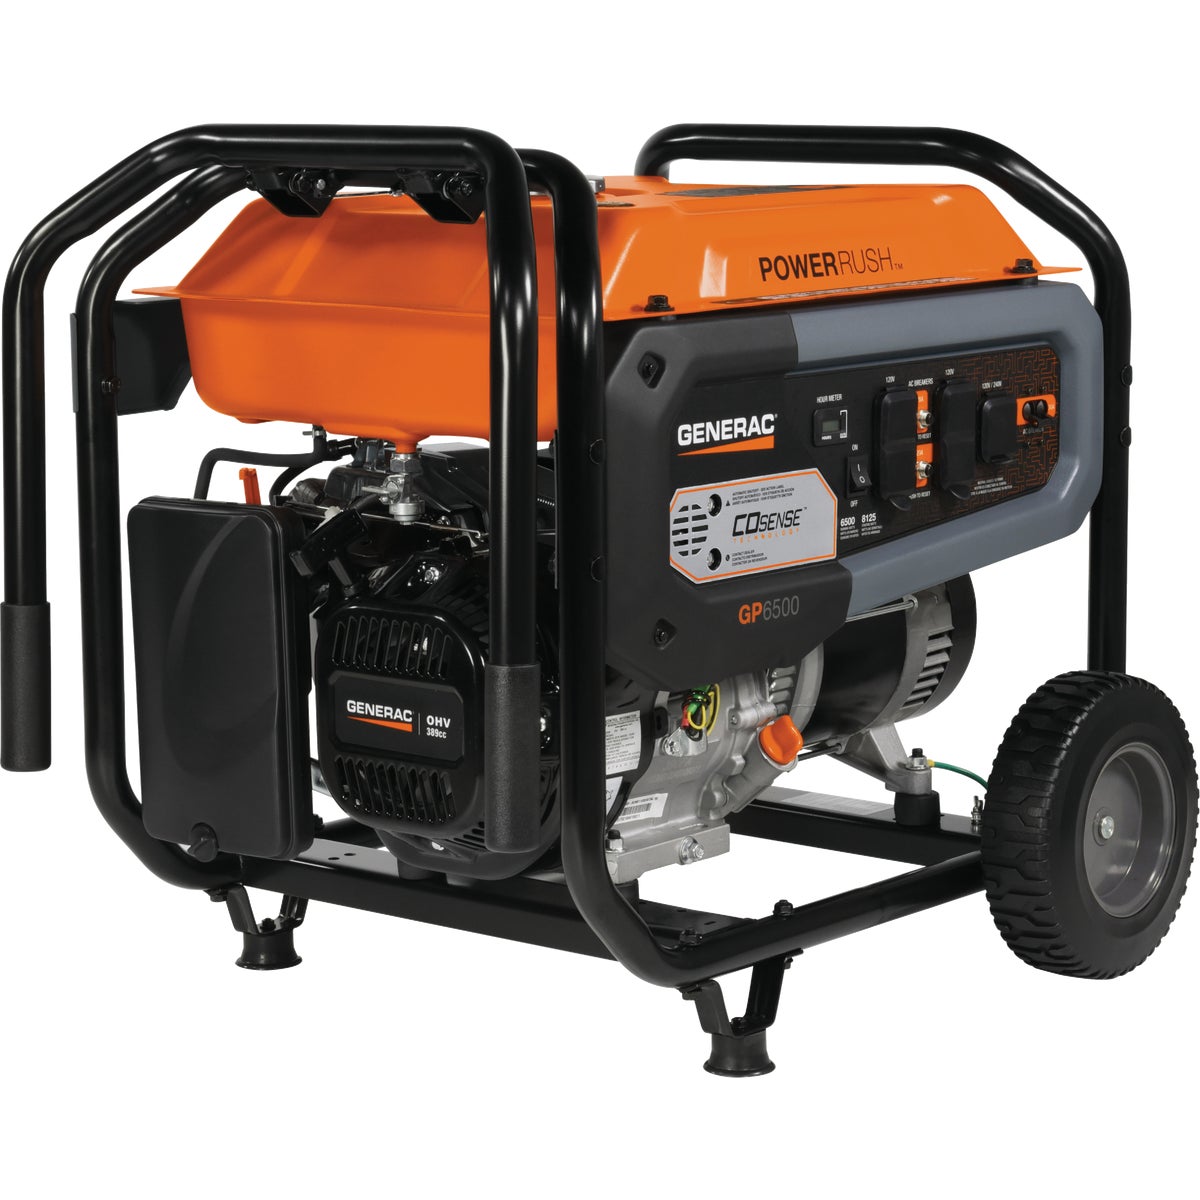 Item 566715, GP6500 portable generator offers PowerRush Advanced Technology, which 